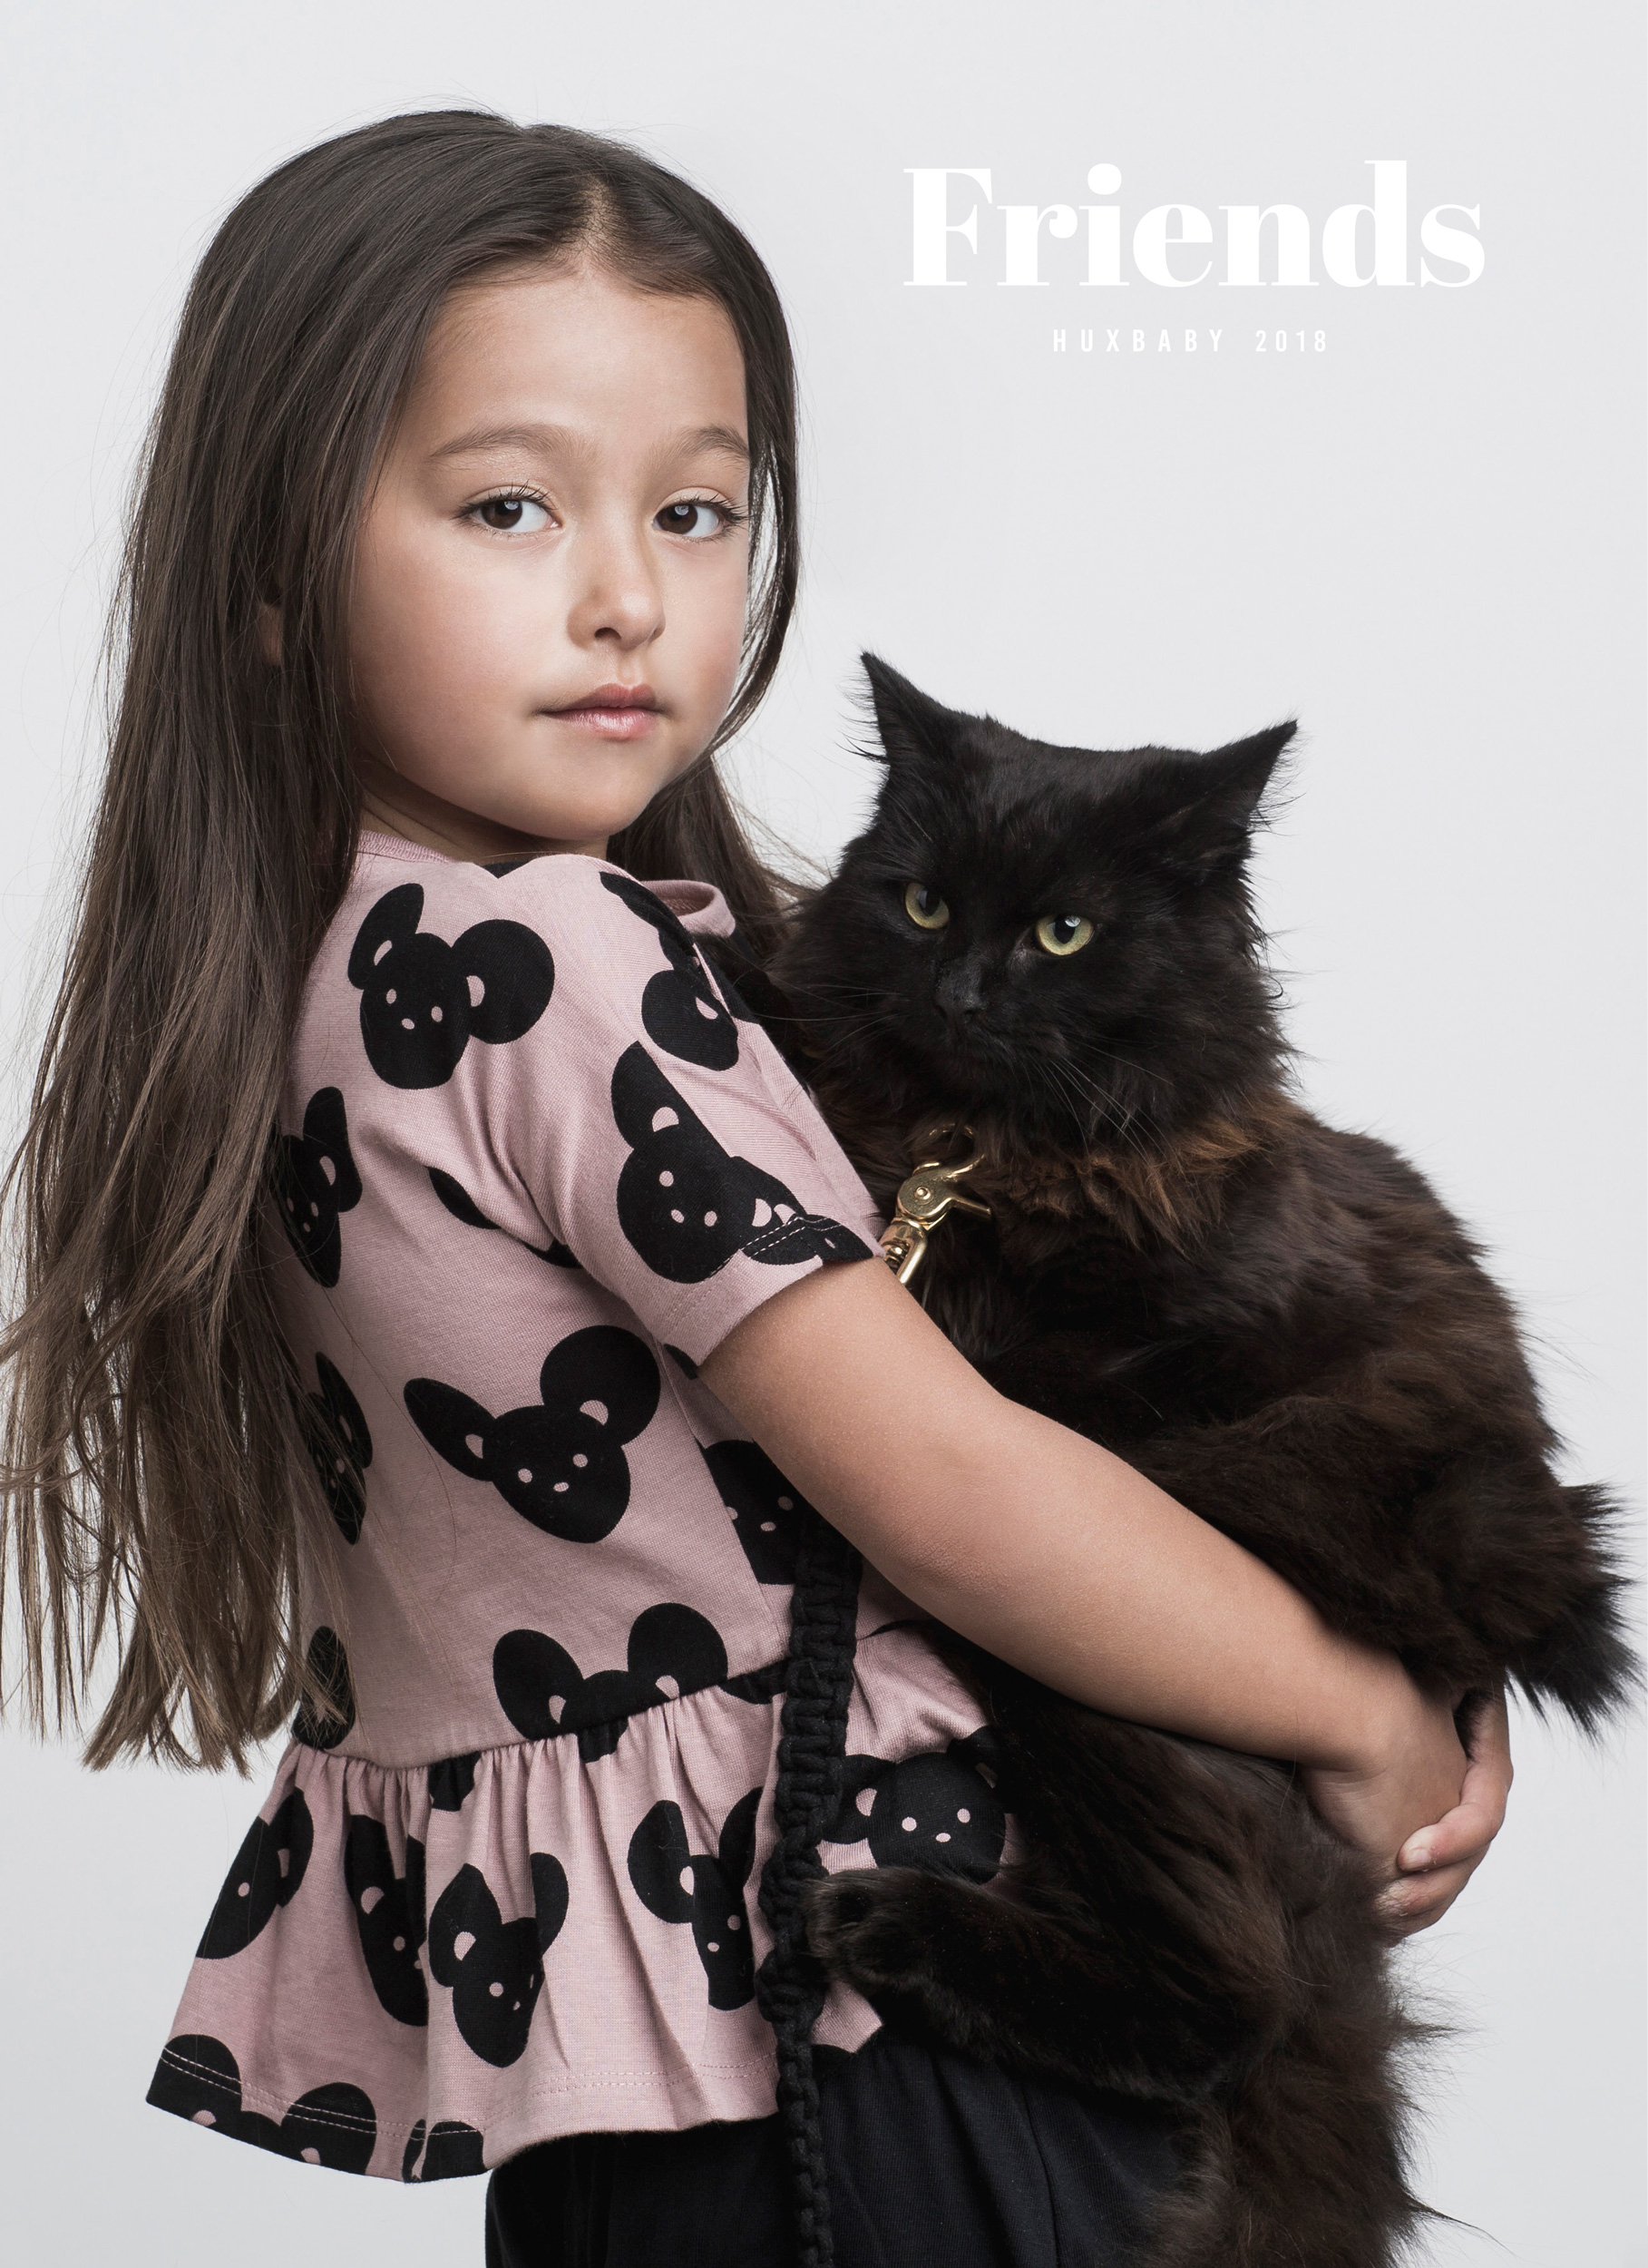 Huxbaby-Childrens-Clothing-Campaign-Friends-by-photographer-Nick-Walters-at-Lumi-Studio-in-Melbourne.jpg